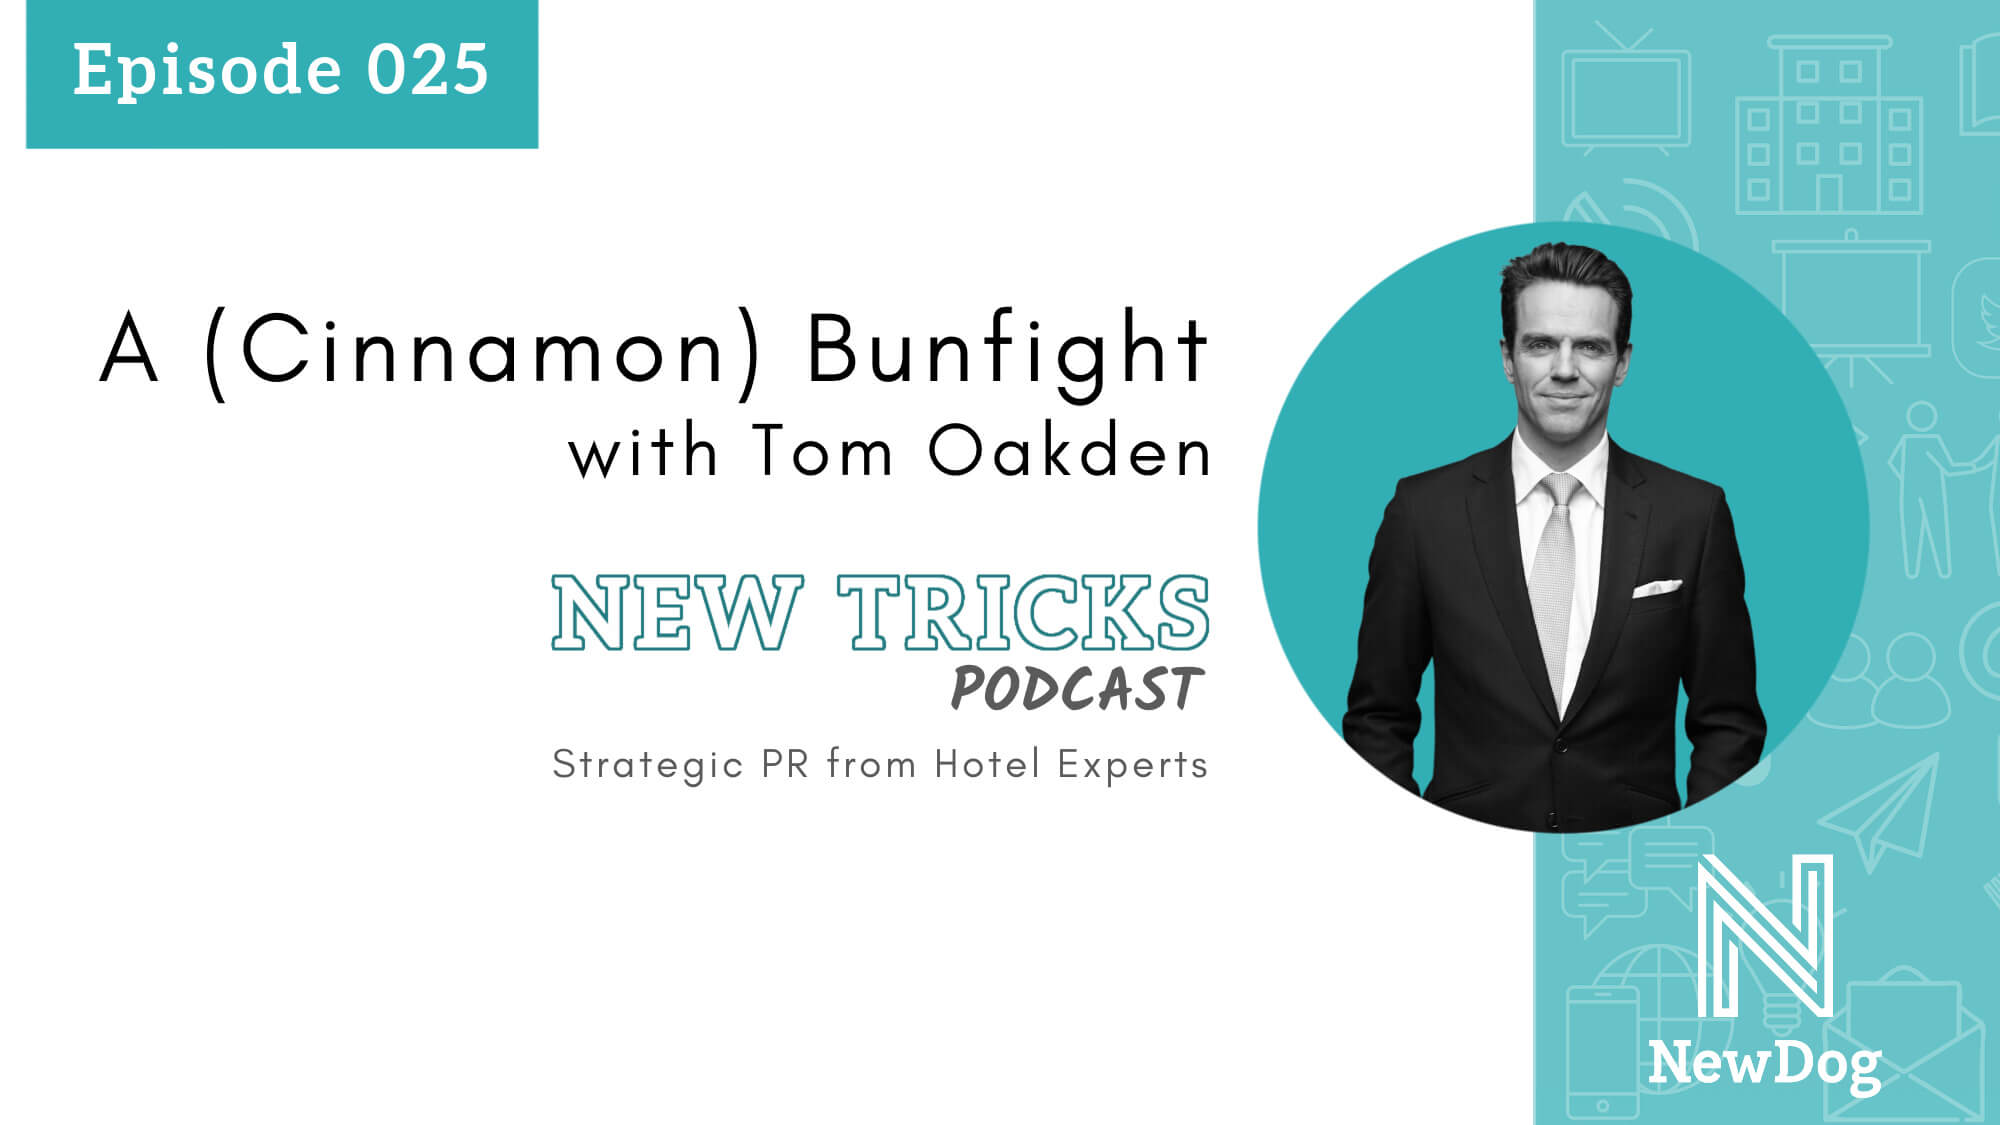 ep25 new tricks podcast with new dog pr - strategic pr from hotel experts